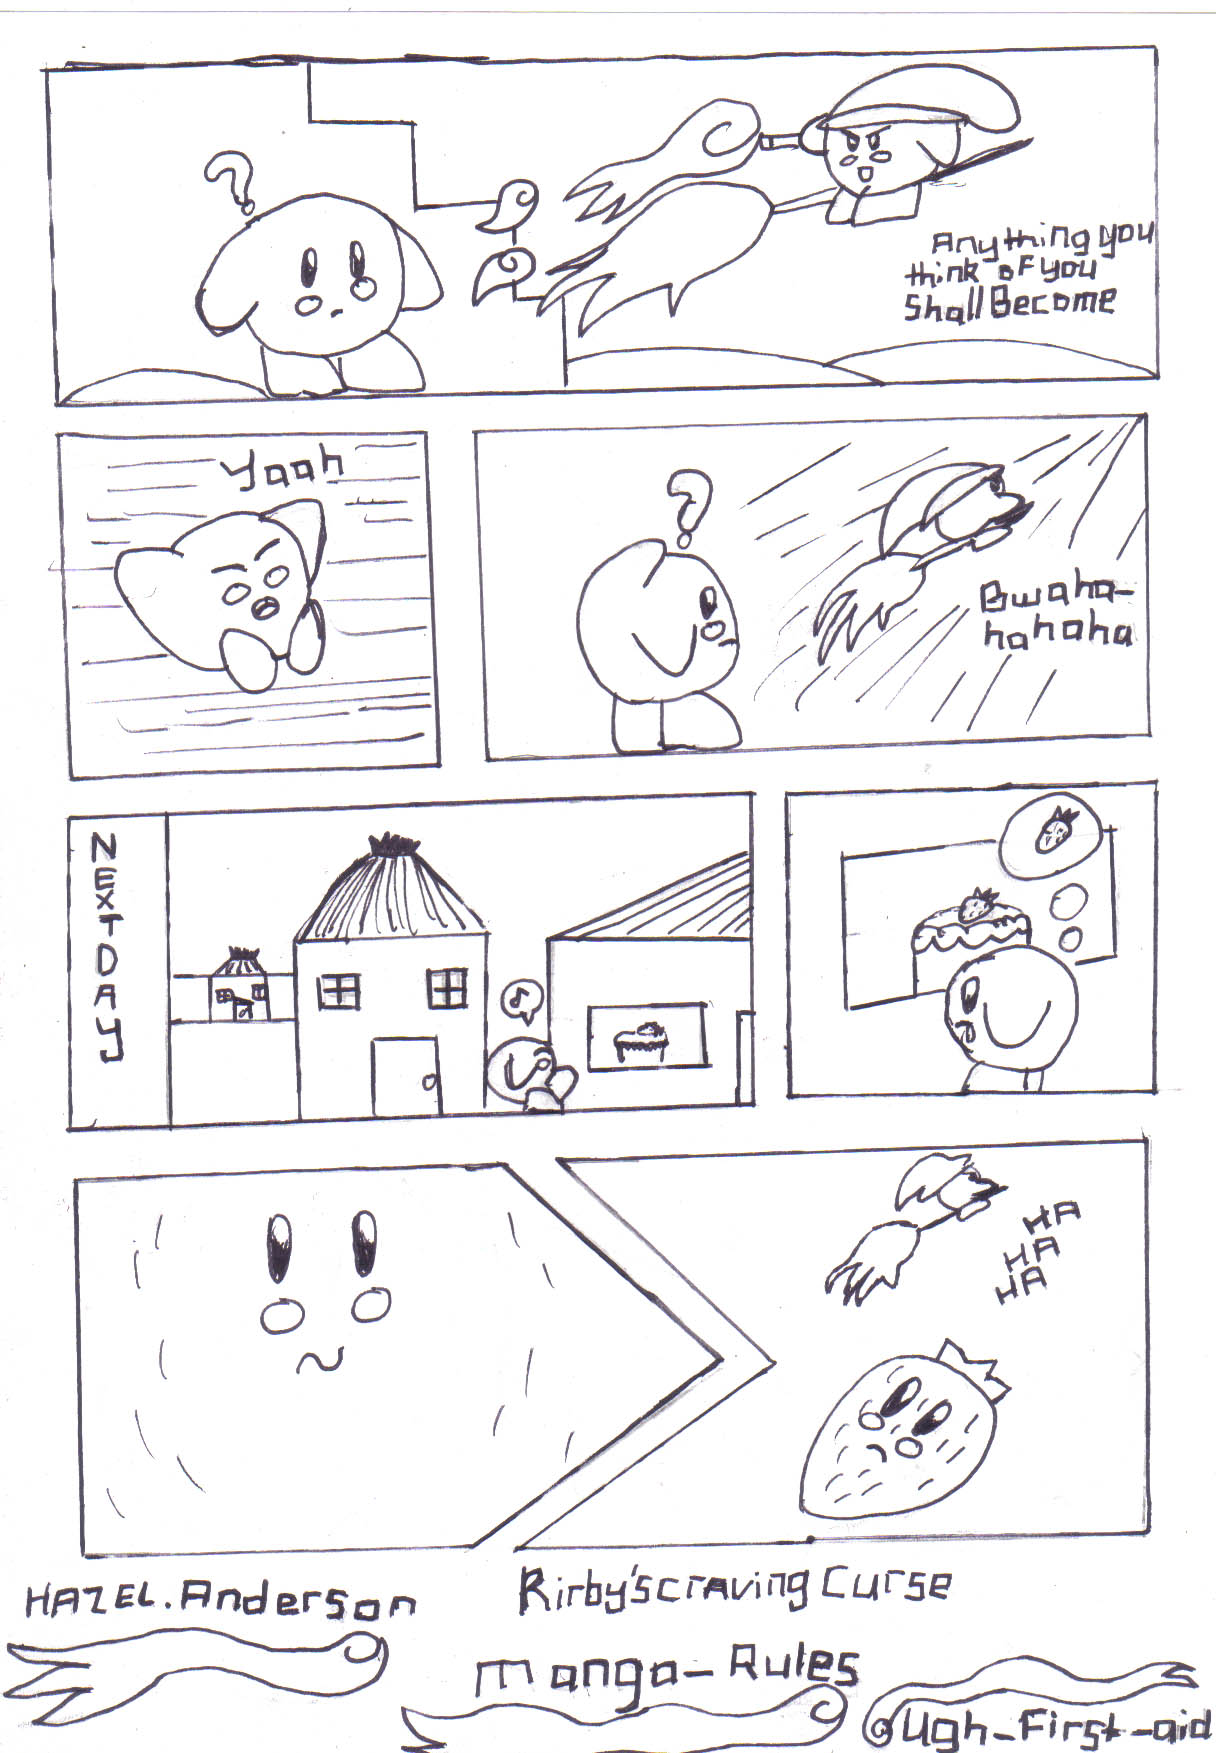 kirby's craving curse by manga_rules